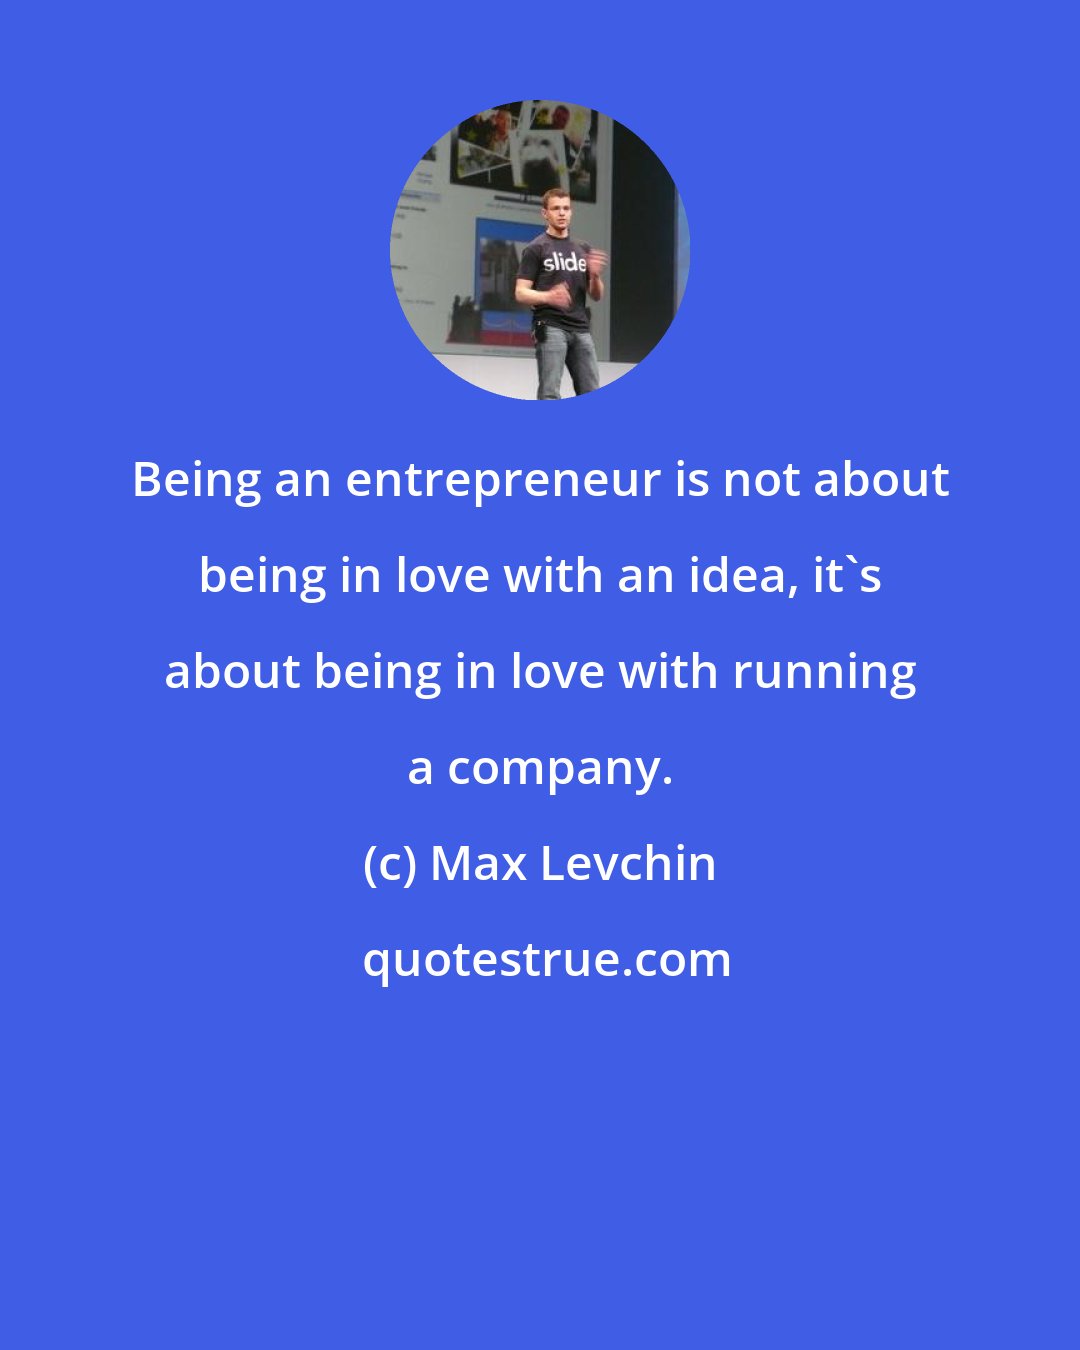 Max Levchin: Being an entrepreneur is not about being in love with an idea, it's about being in love with running a company.